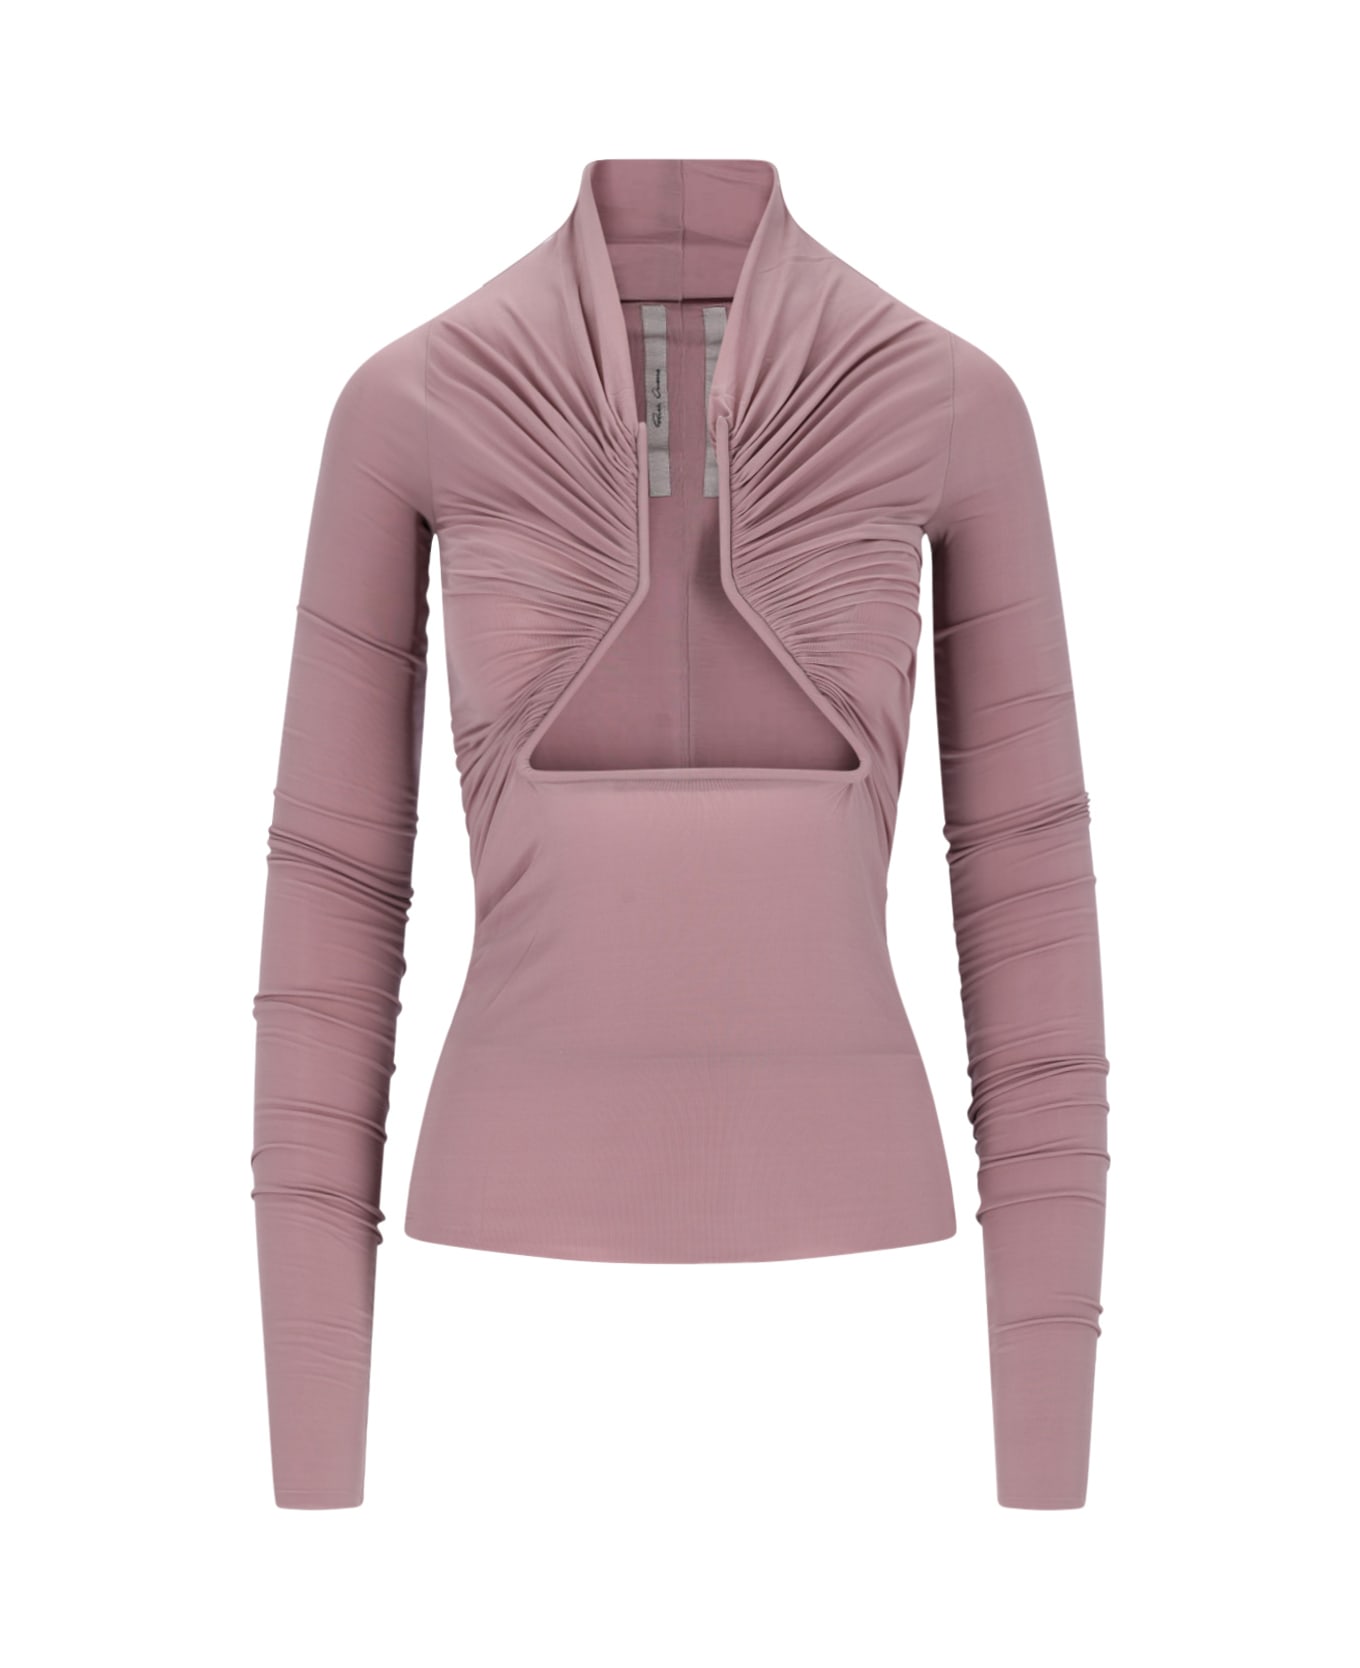 Rick Owens Cut Out Detail Top - Pink